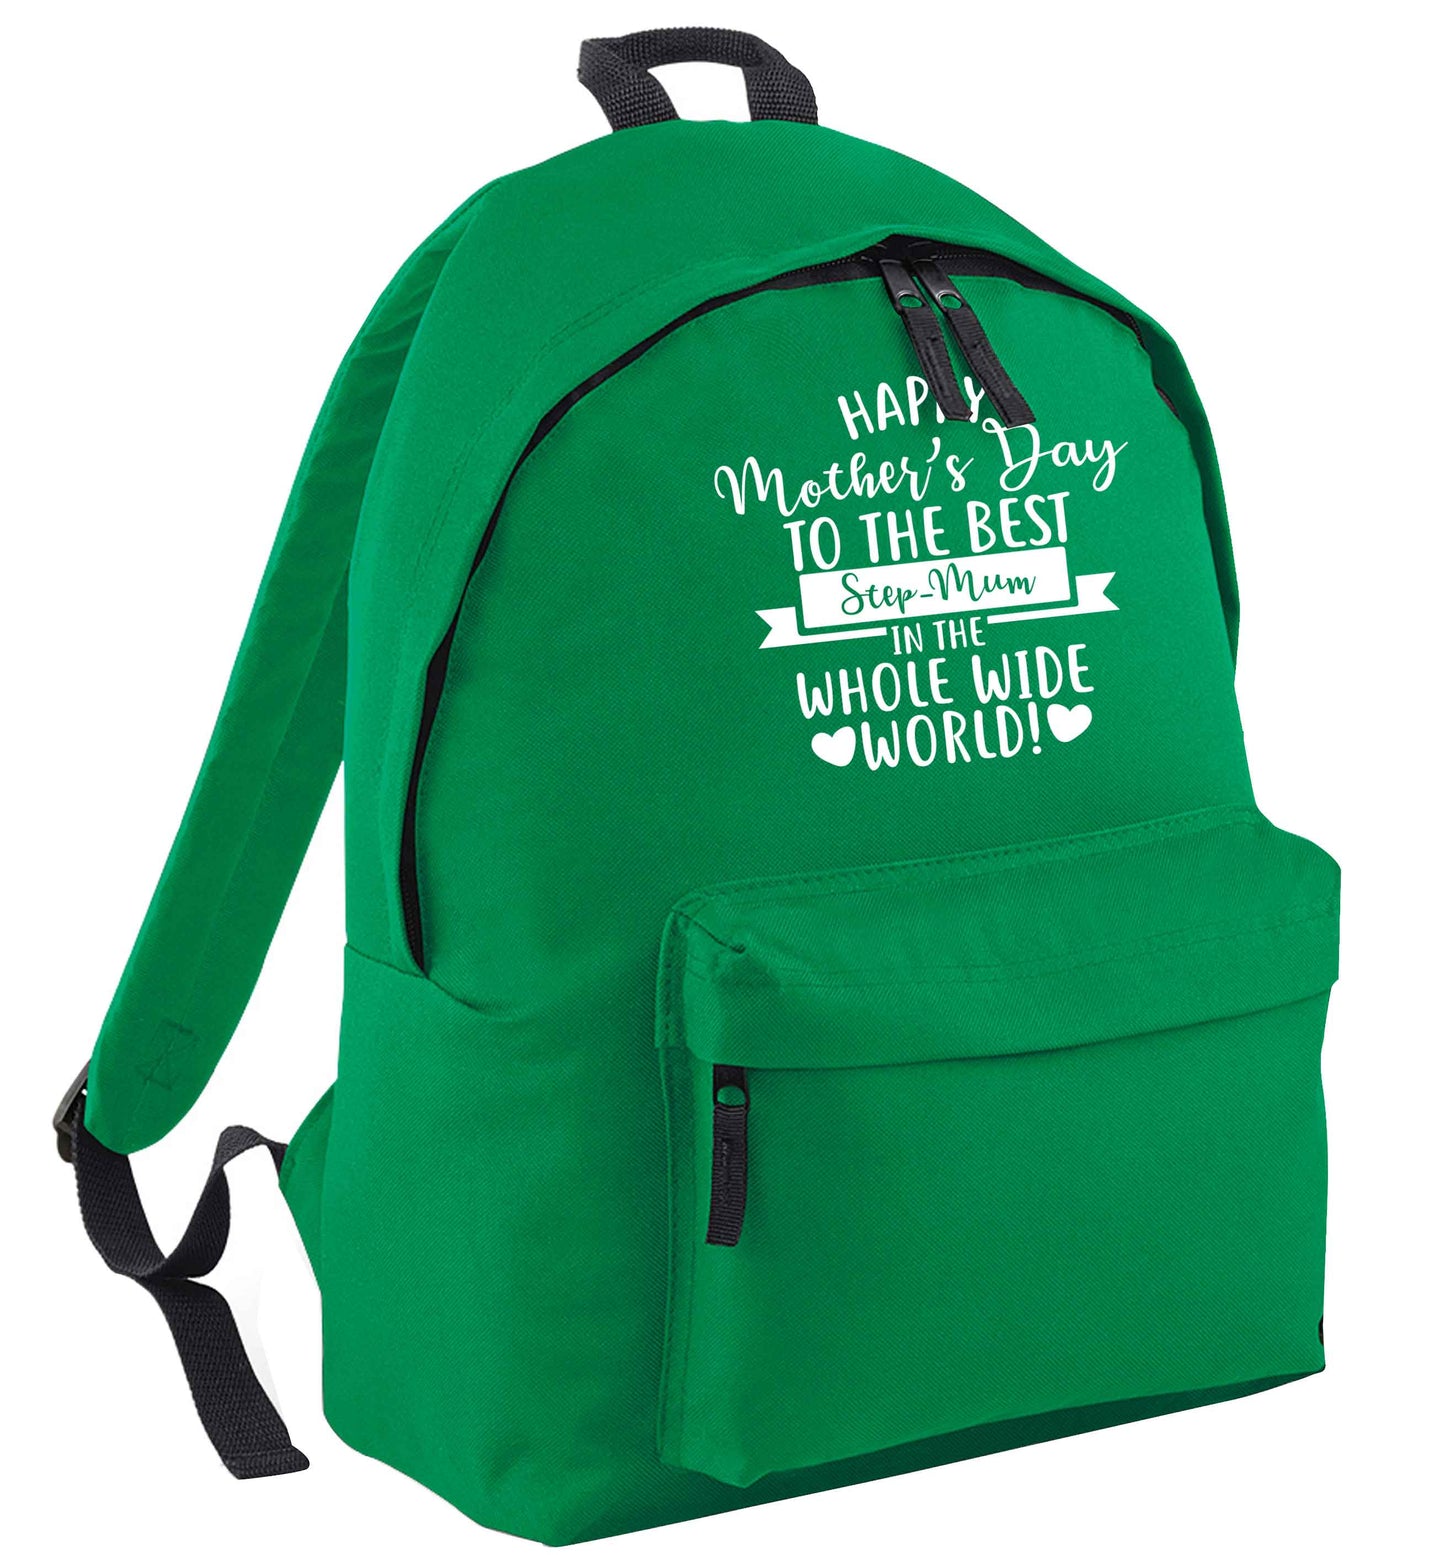 Happy mother's day to the best step-mum in the world green adults backpack